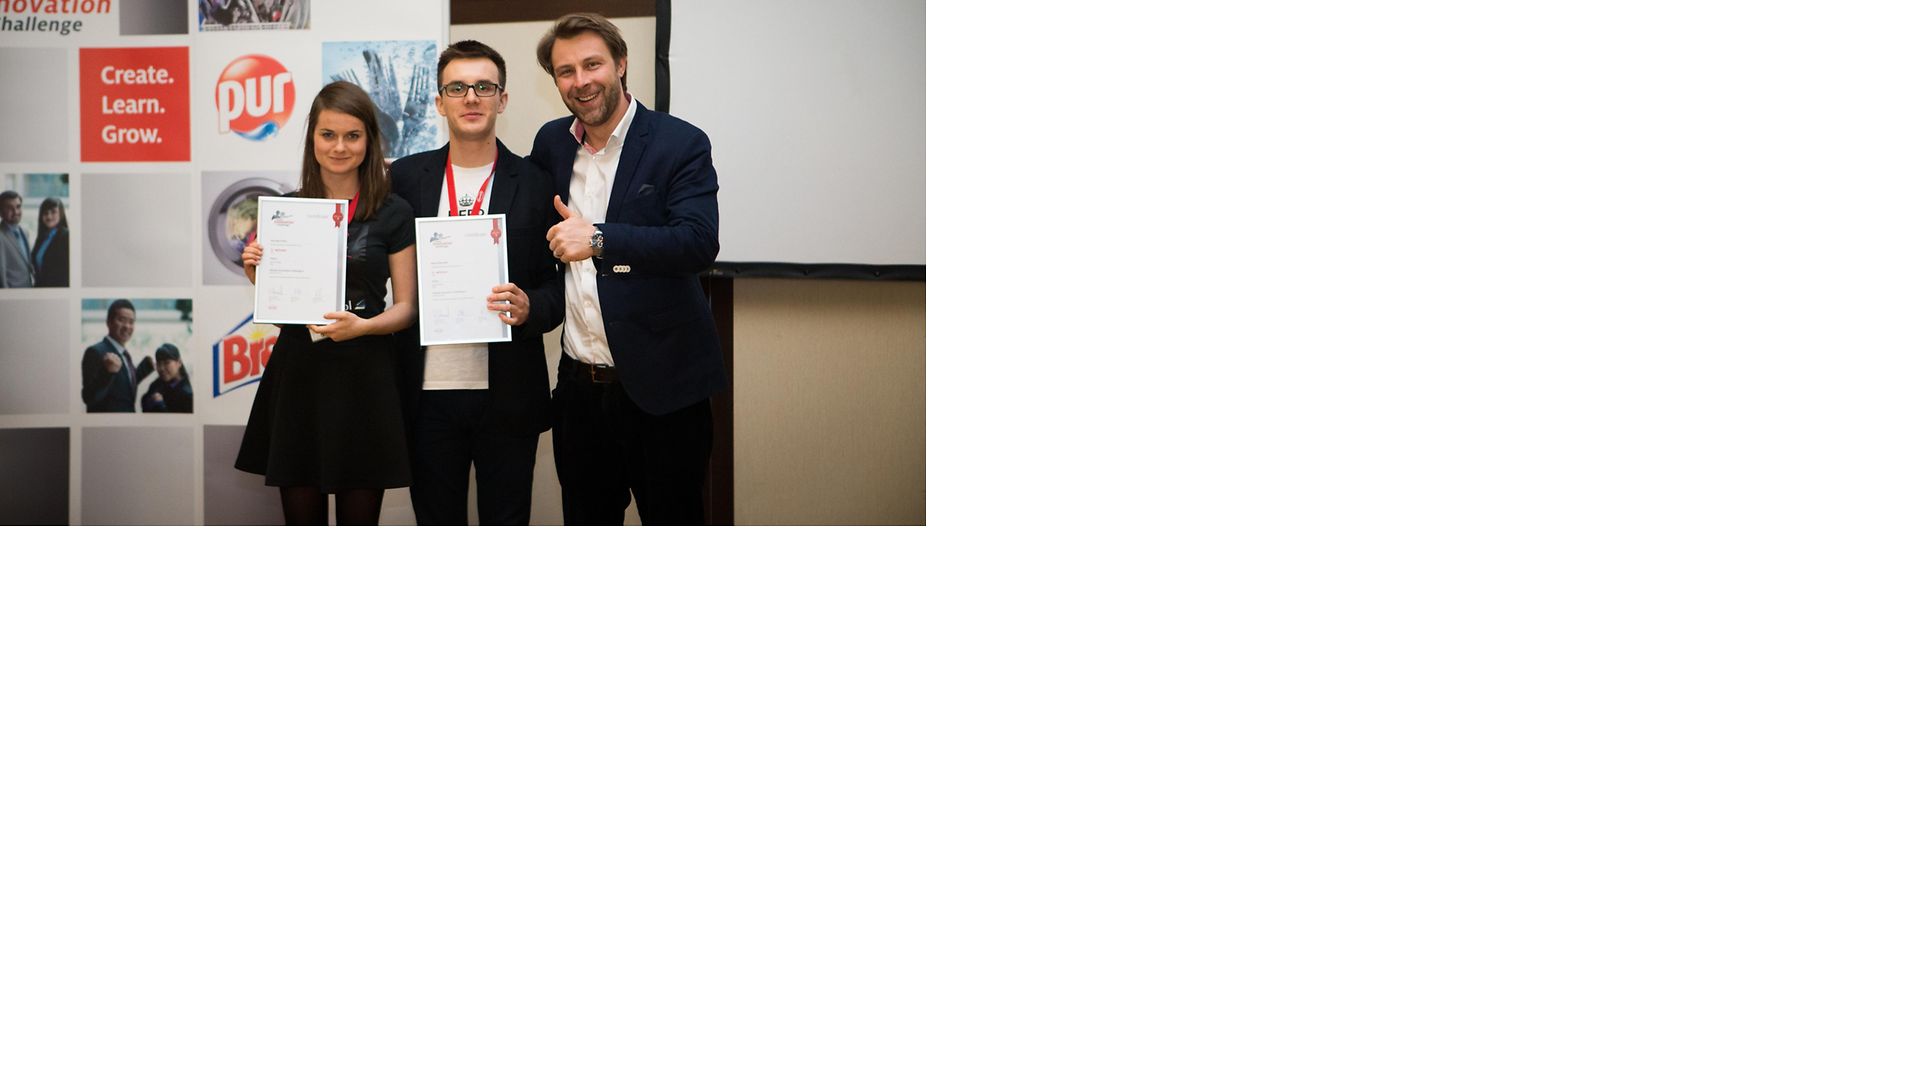 Winners from Poland with their Henkel mentor